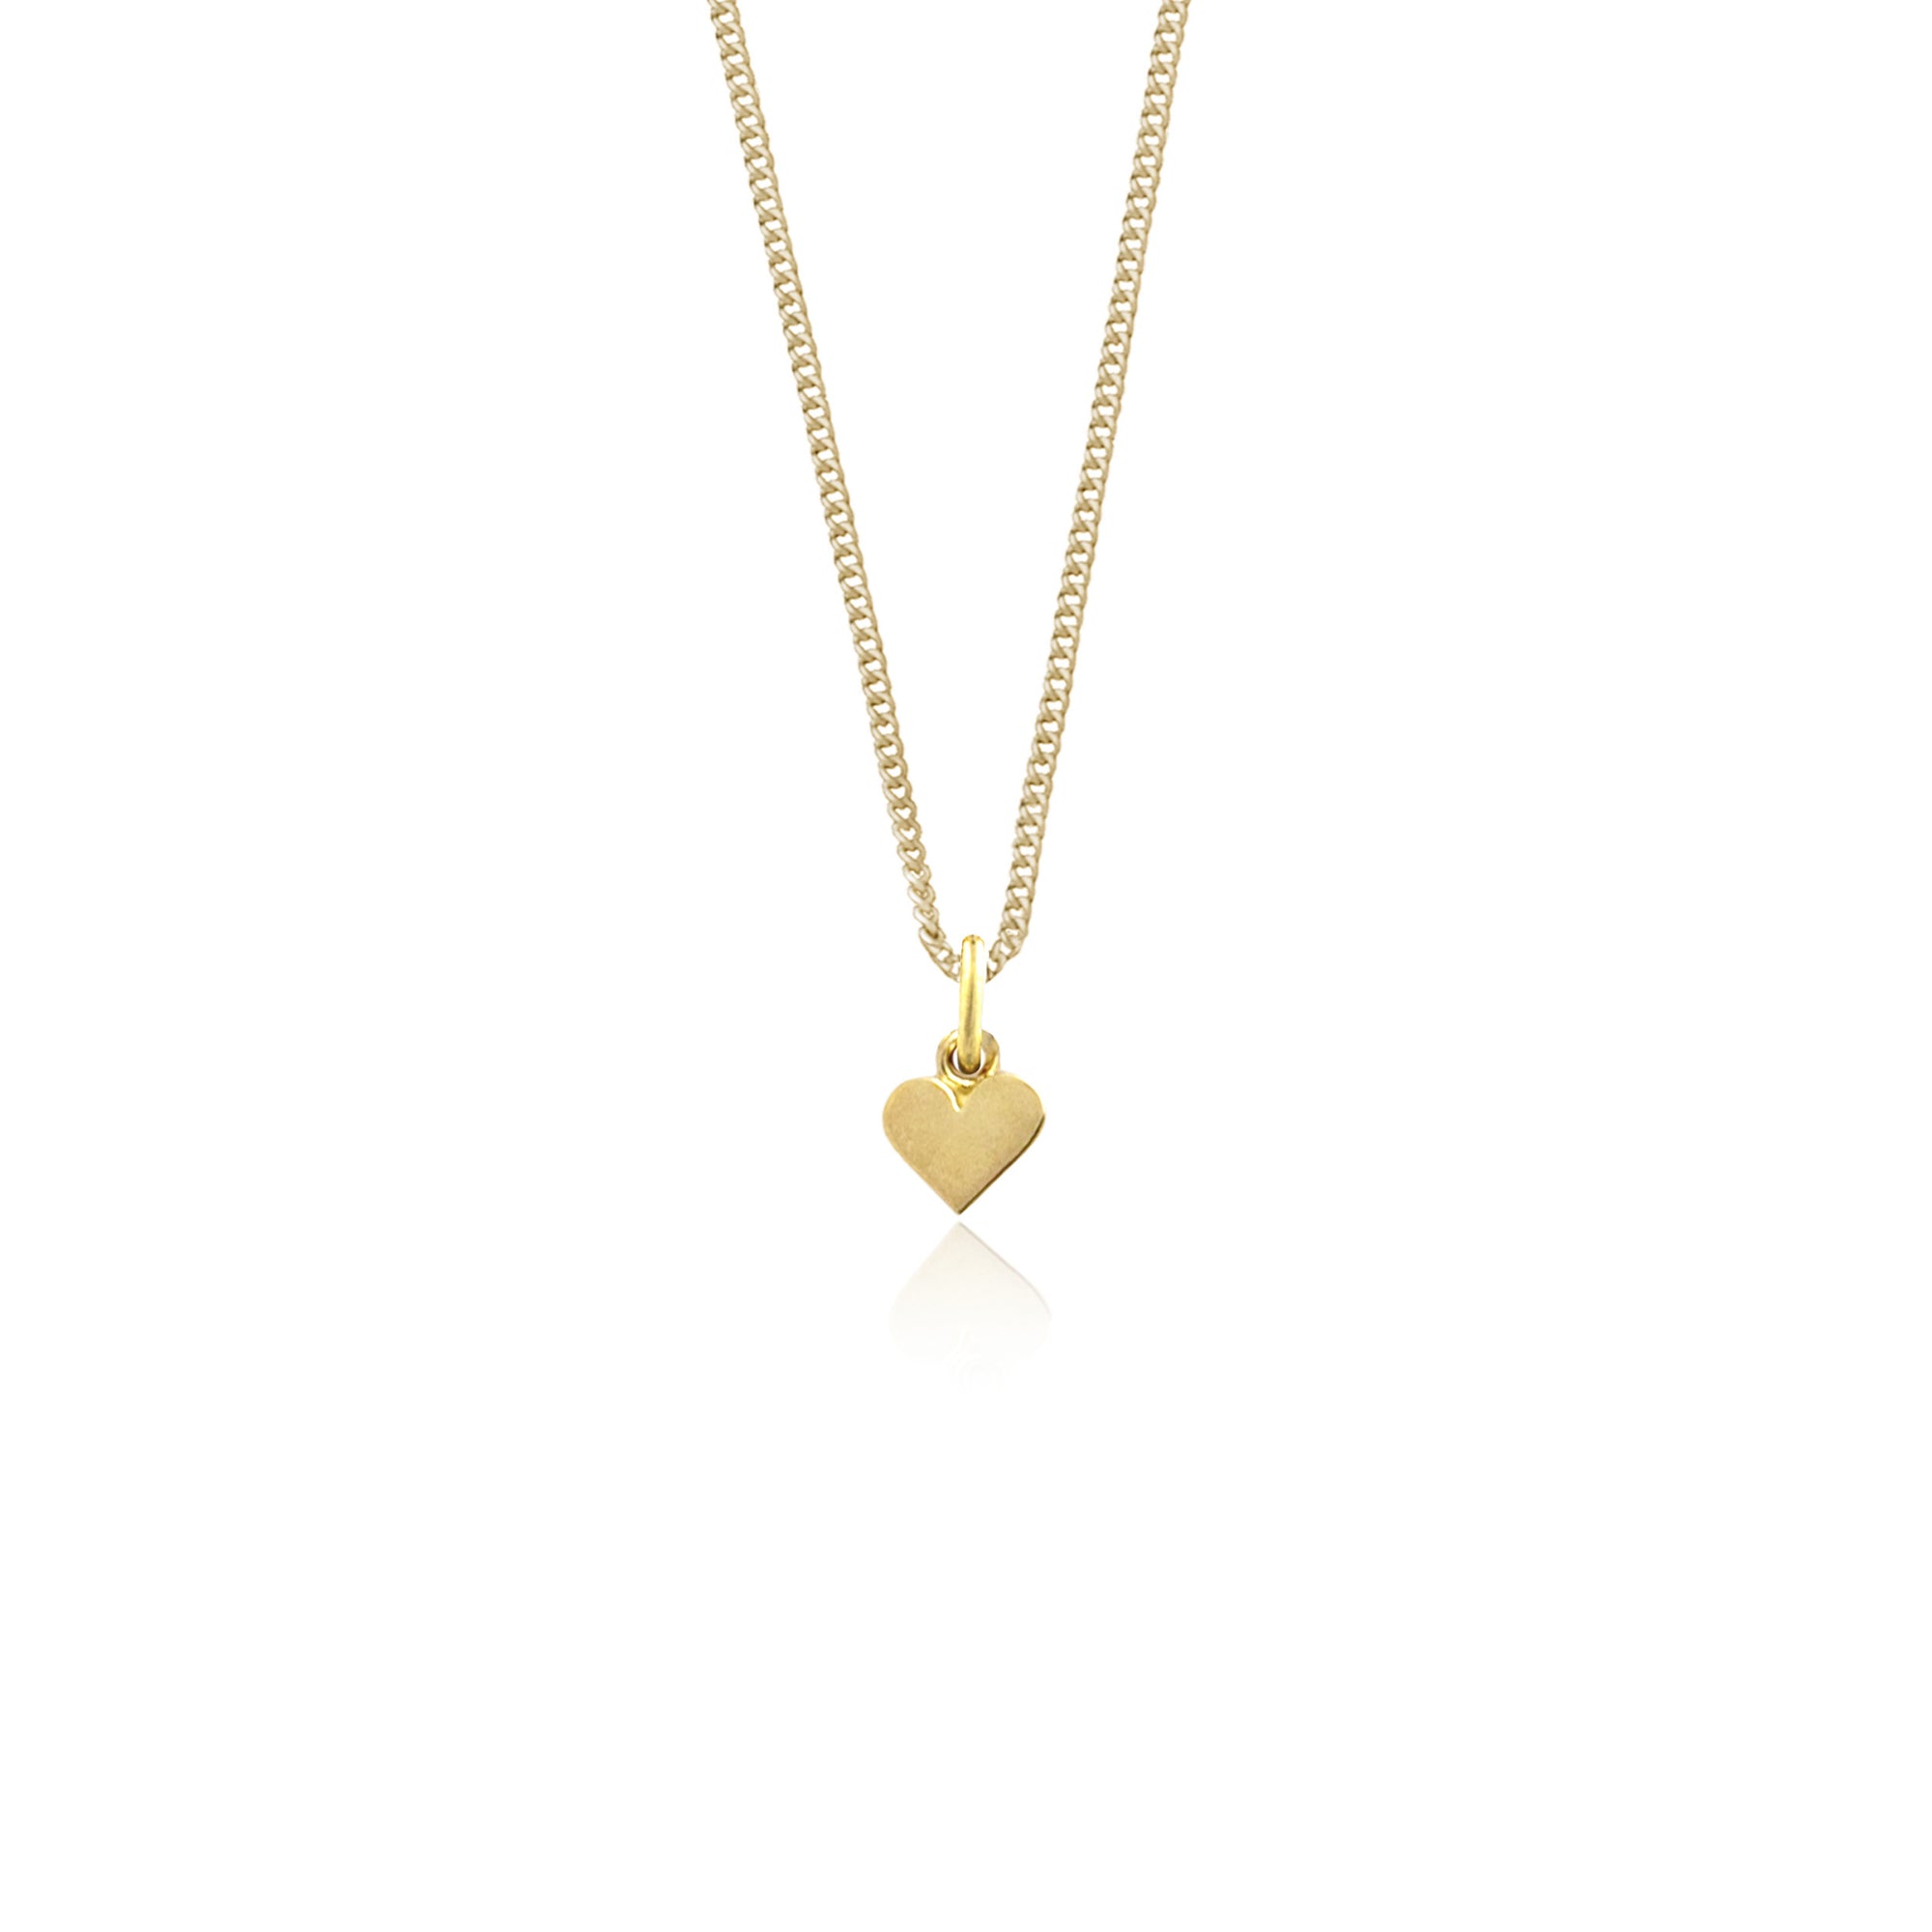 SOLID GOLD - Single Heart of Gold Necklace